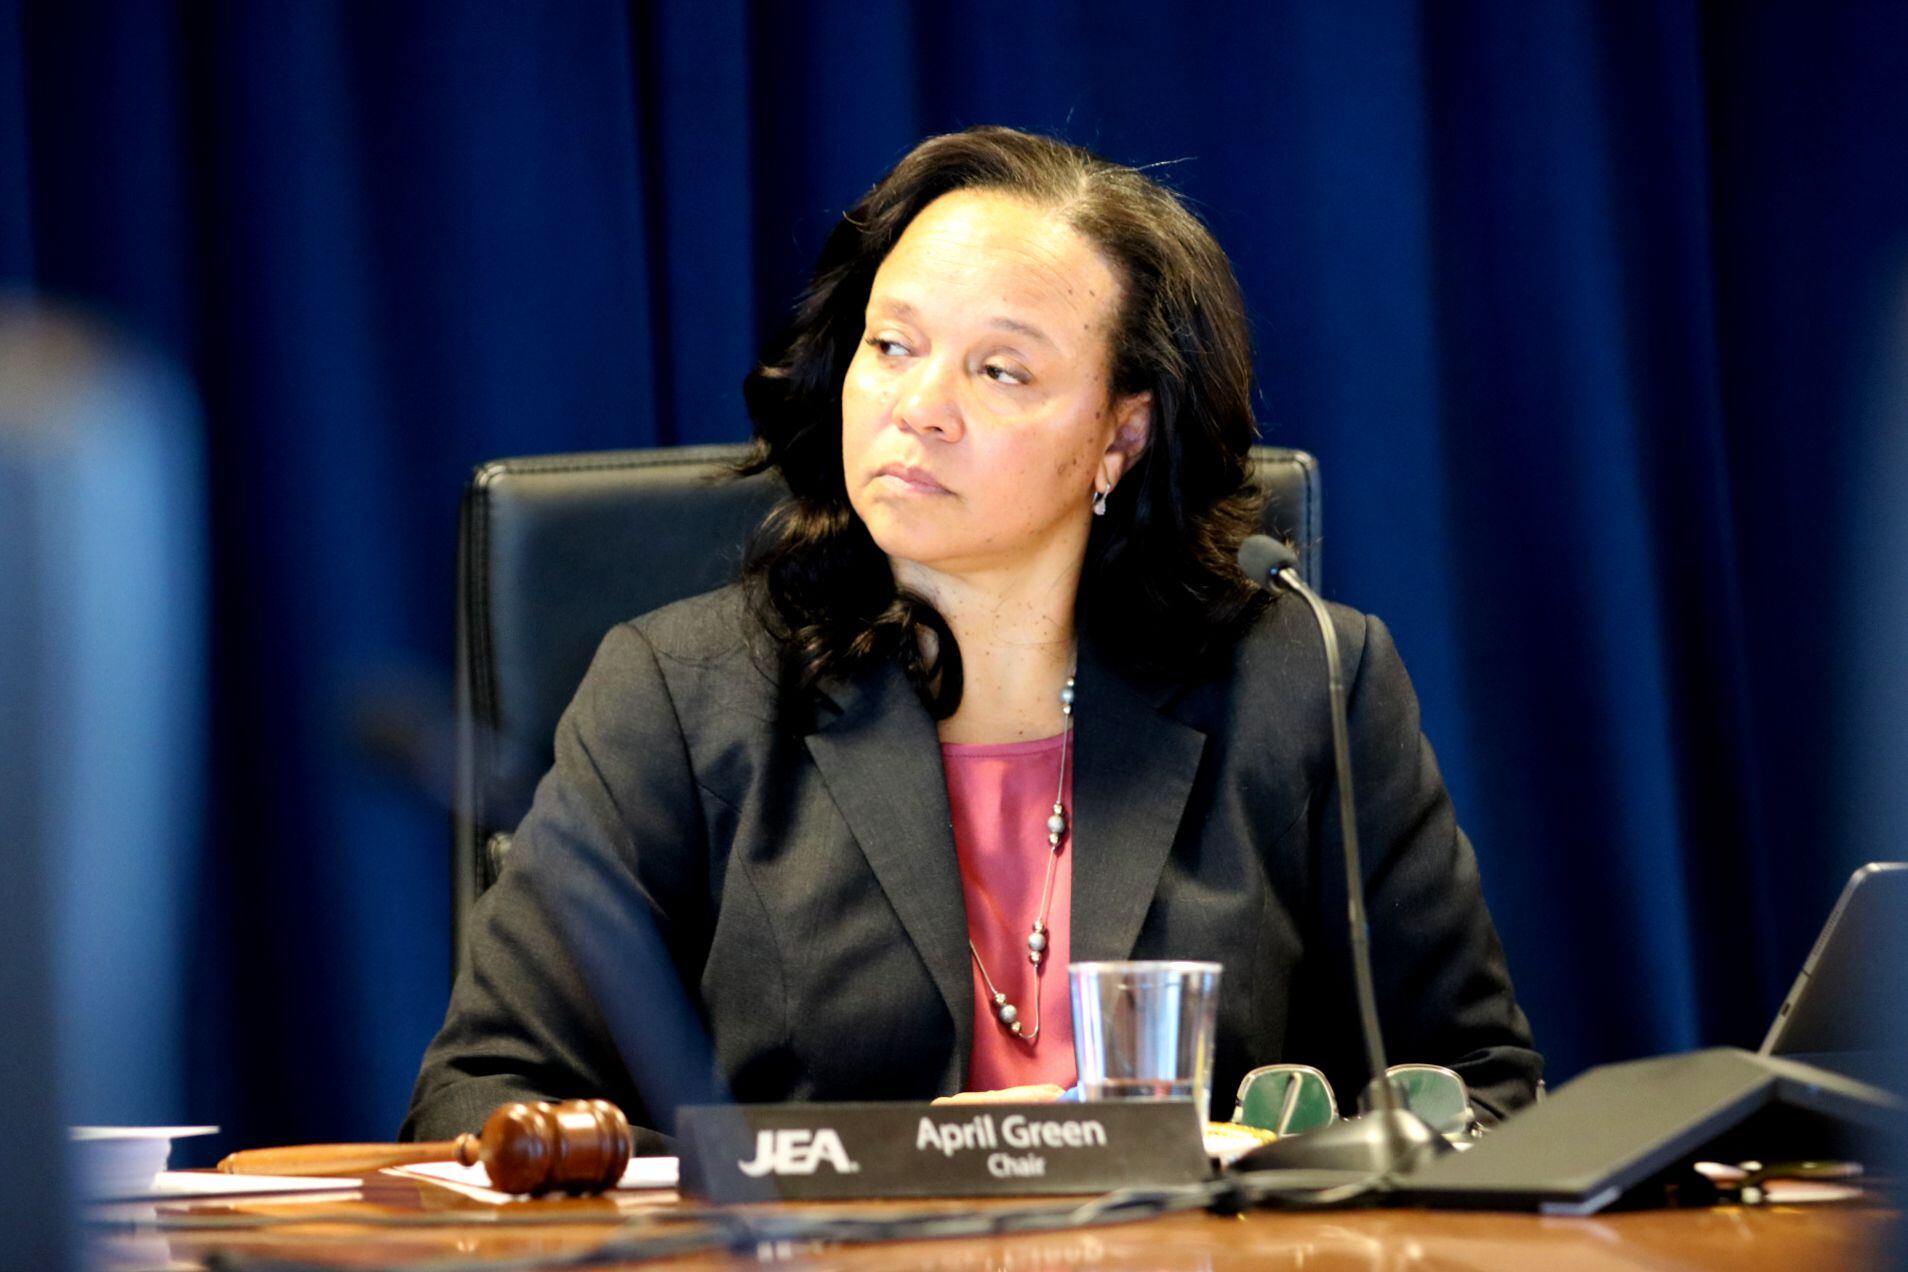 April Green, former Chair of JEA Board of Directors